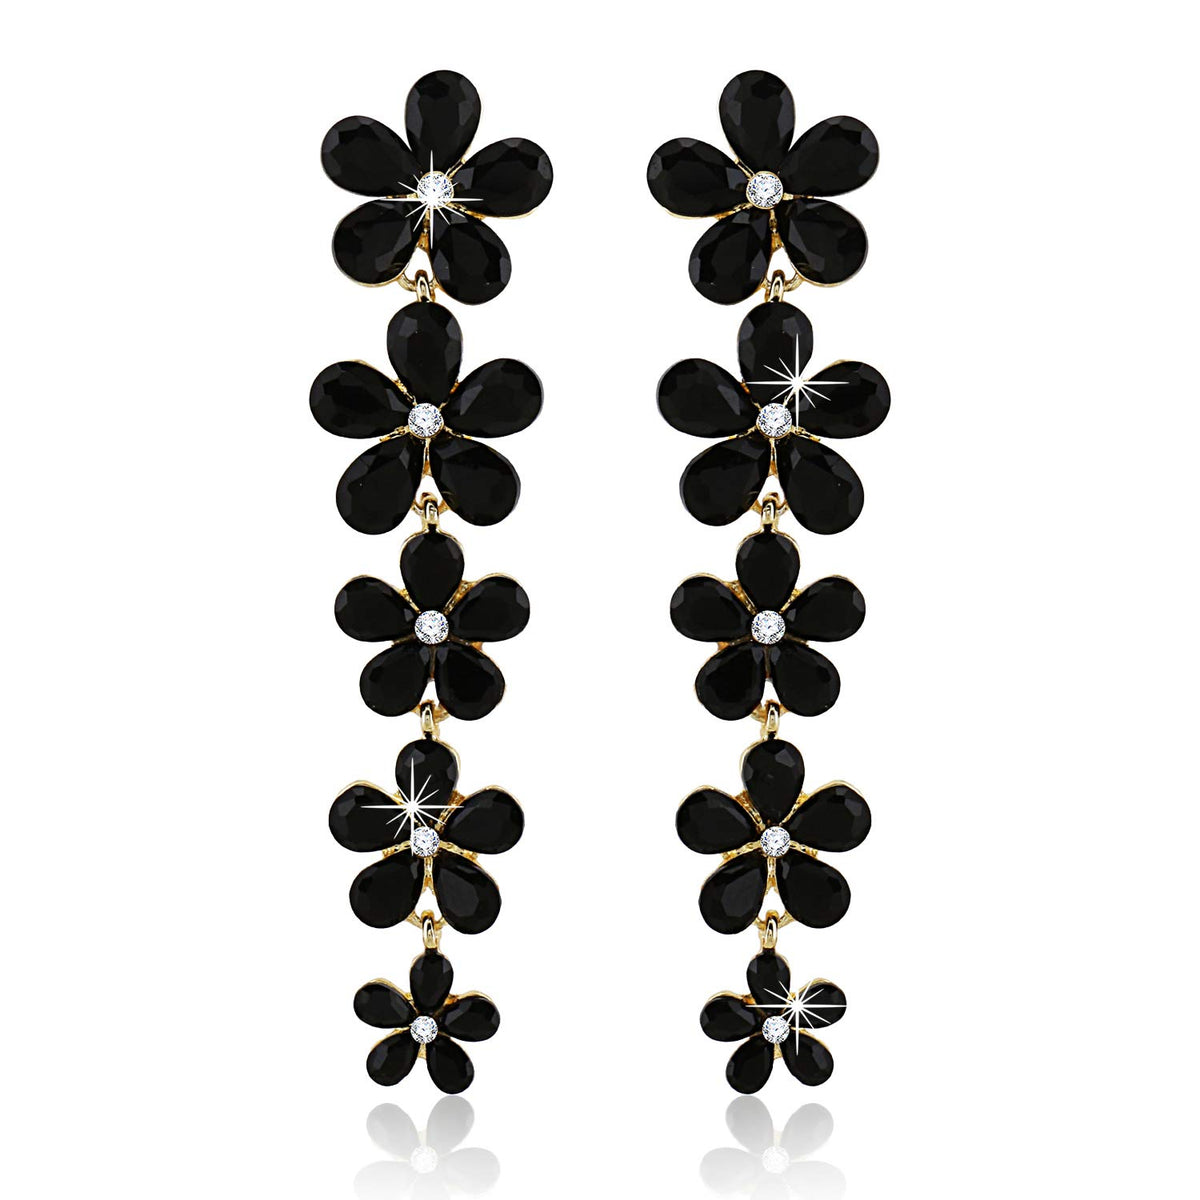 Yellow Chimes Danglers Earrings for Women Black Crystal Danglers Sparkling Crystal Floral Shaped Dangle Earrings for Women and Girls.